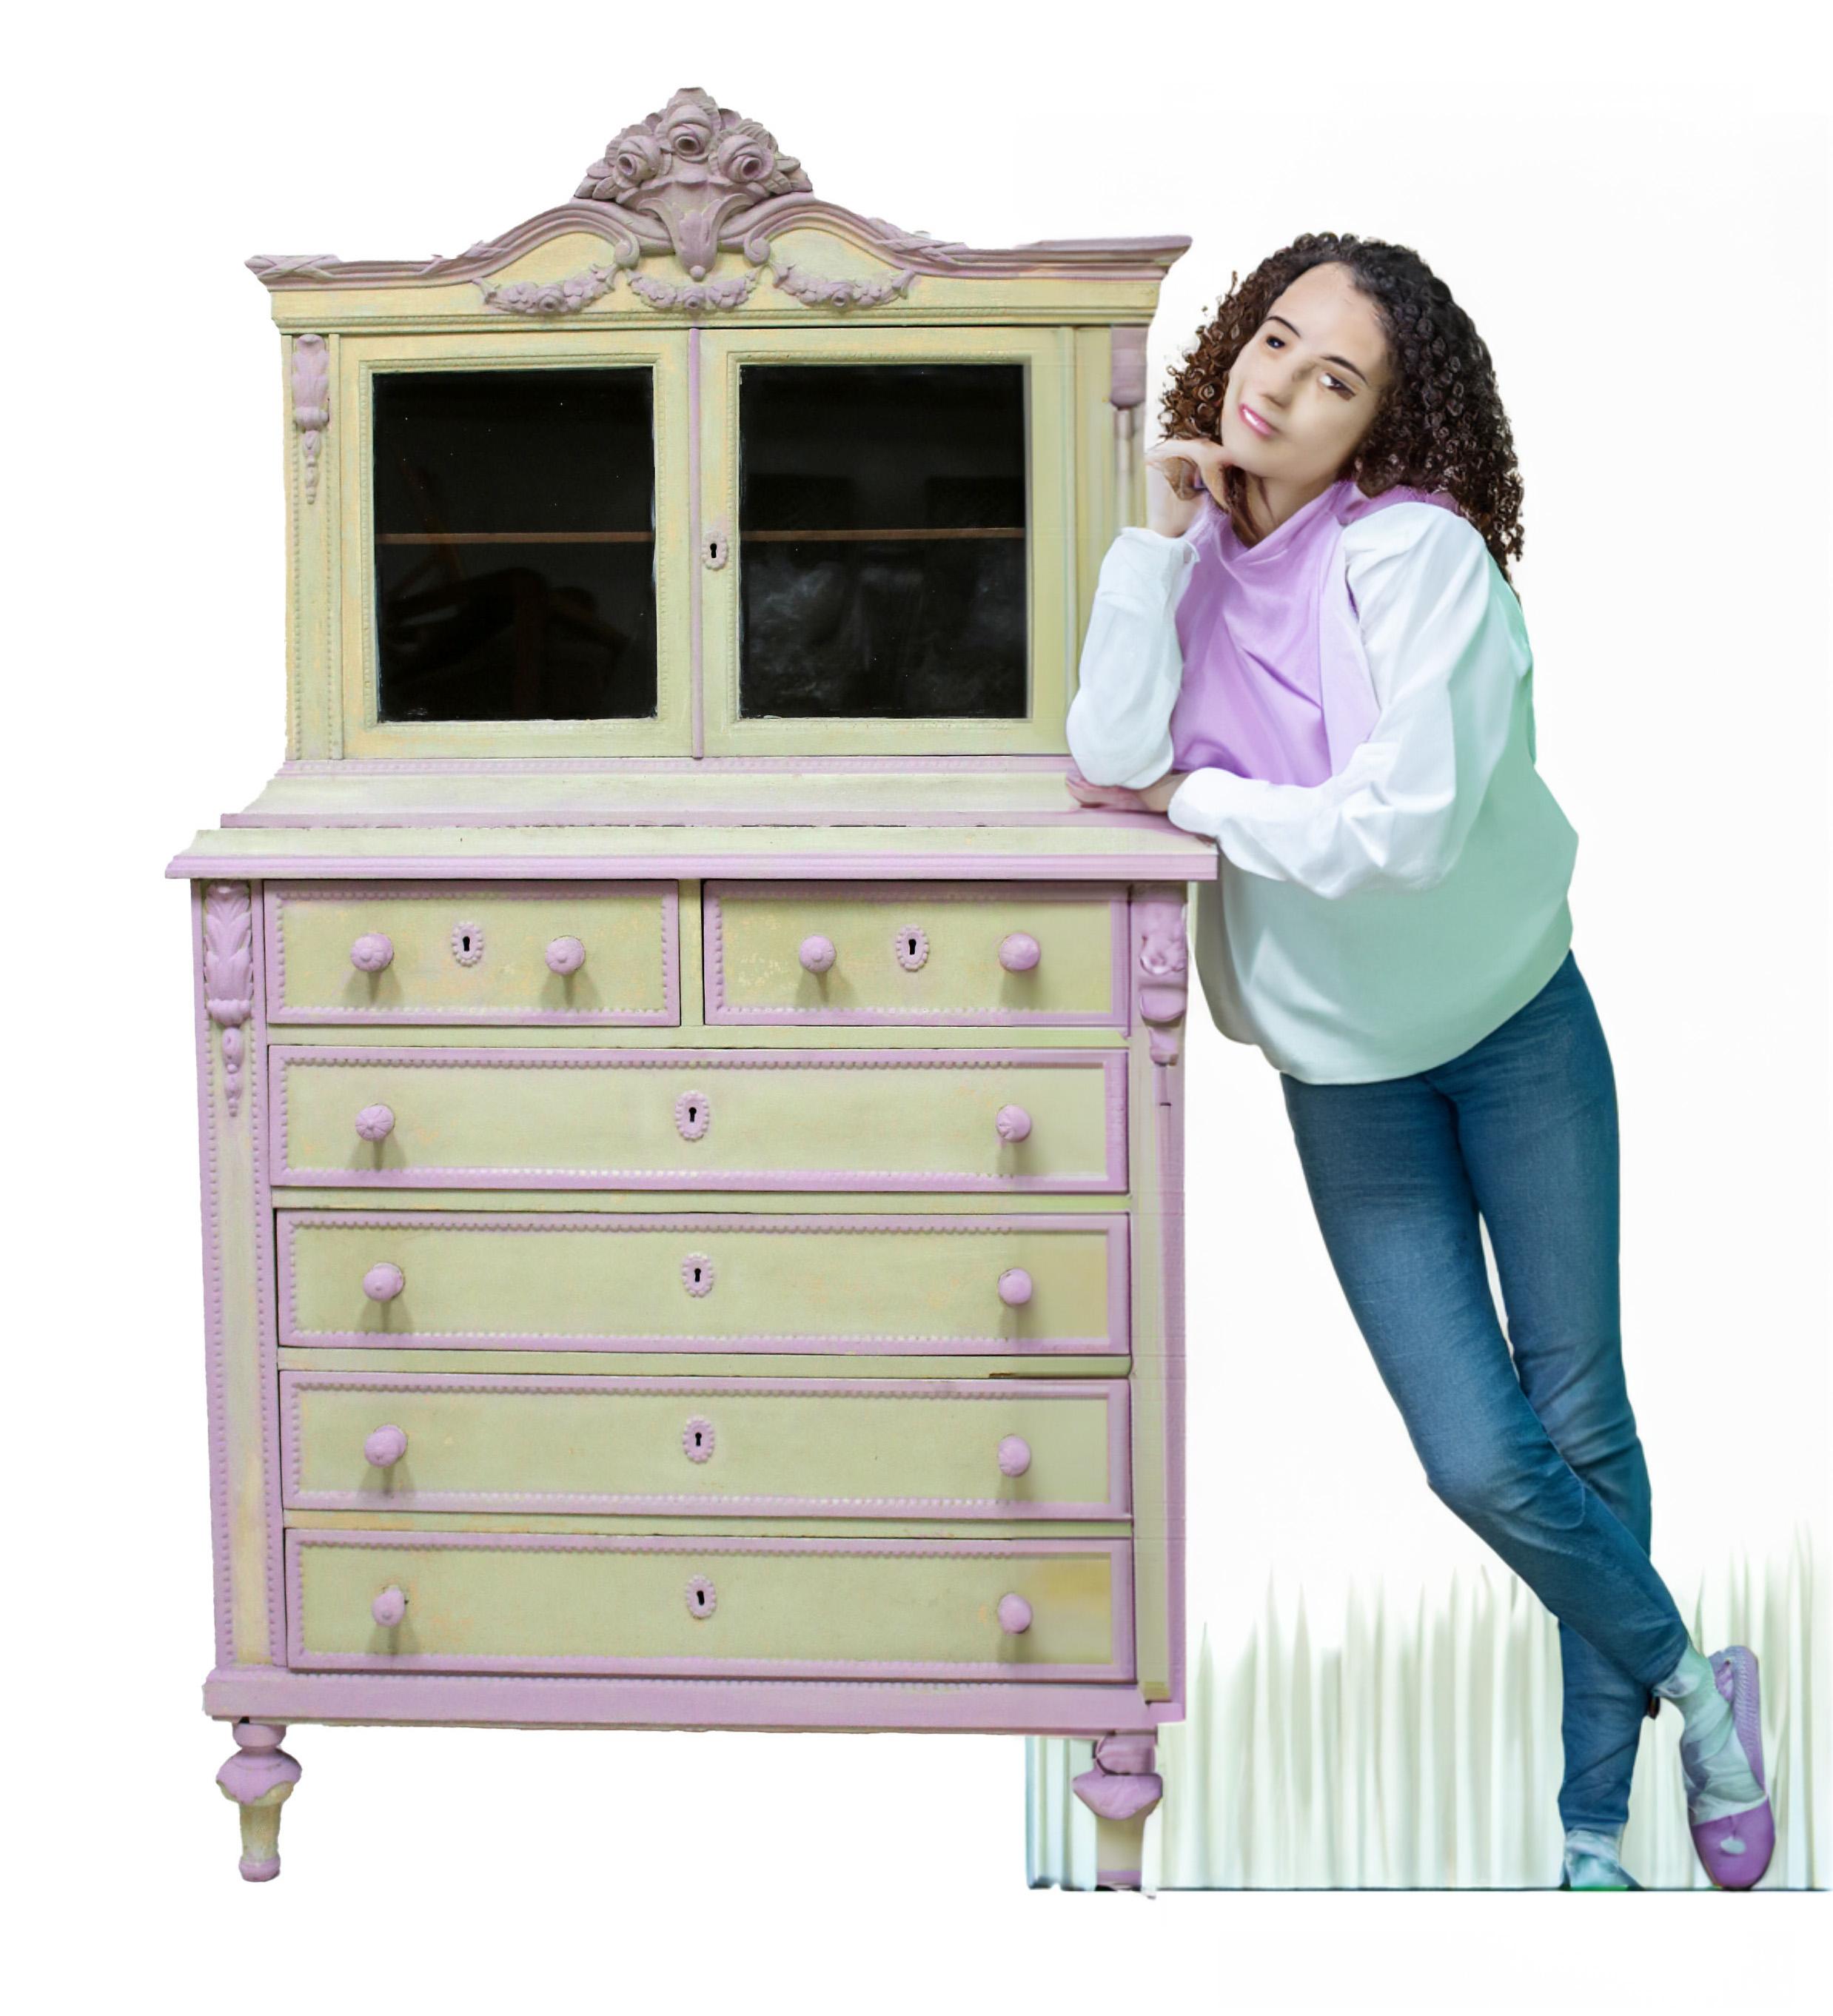 This is a one of a kind beautiful armoire suitable for a girls' room - it was originally custom made. It provides ample storage for clothes or underwear. The color theme also highlights it's girly vibe.